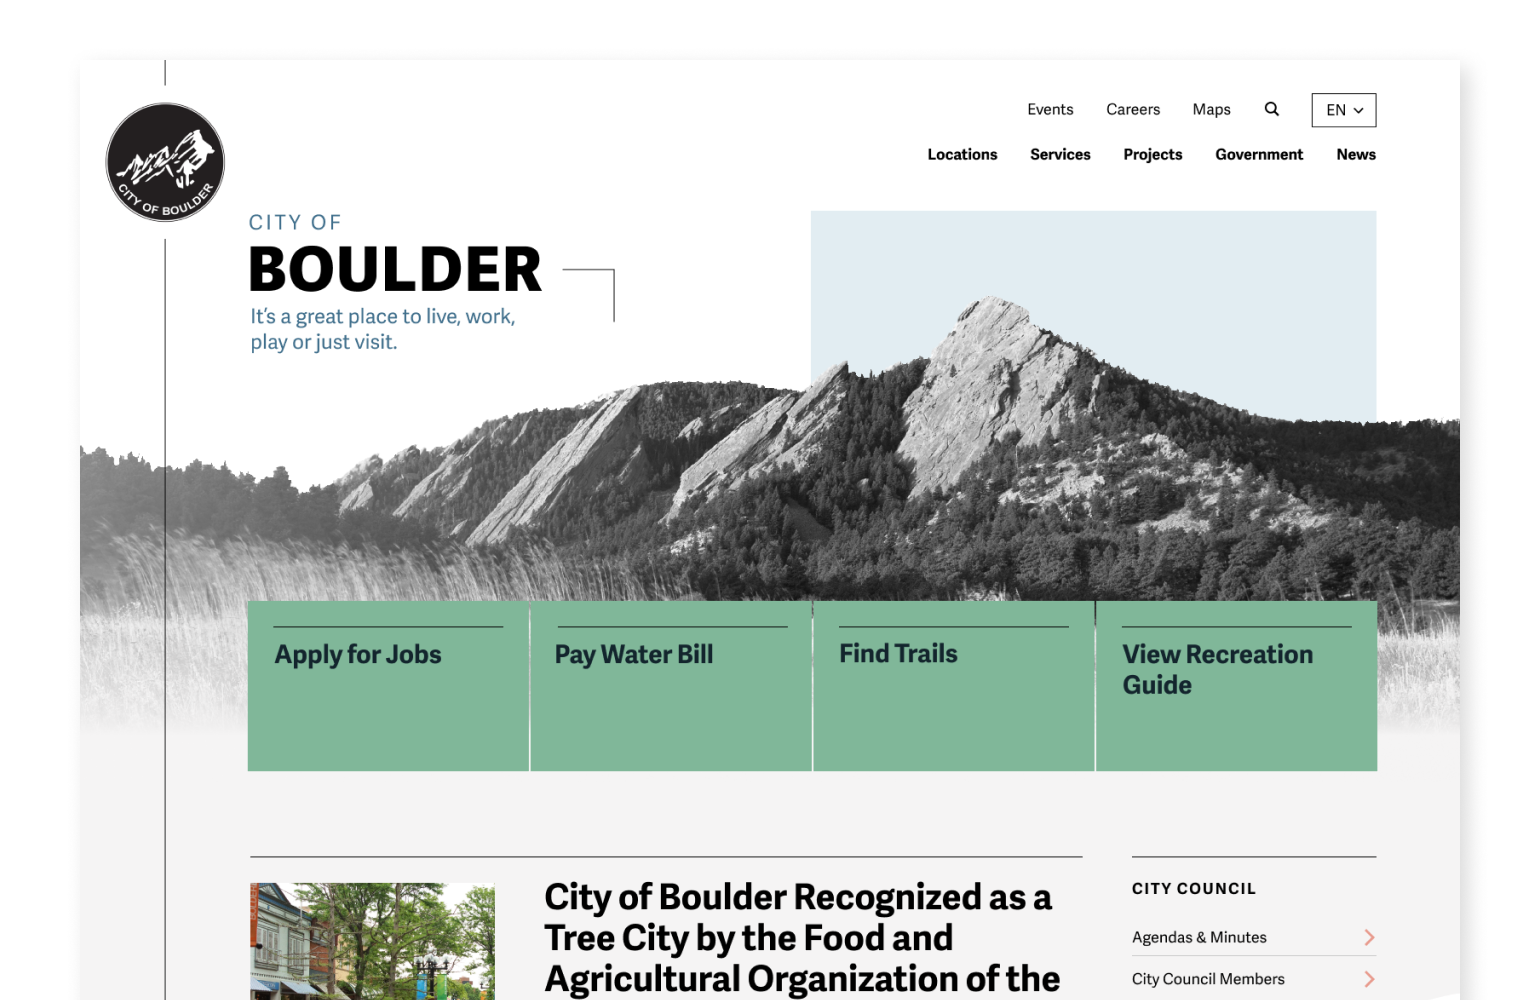 City of Boulder website includes easy to read text